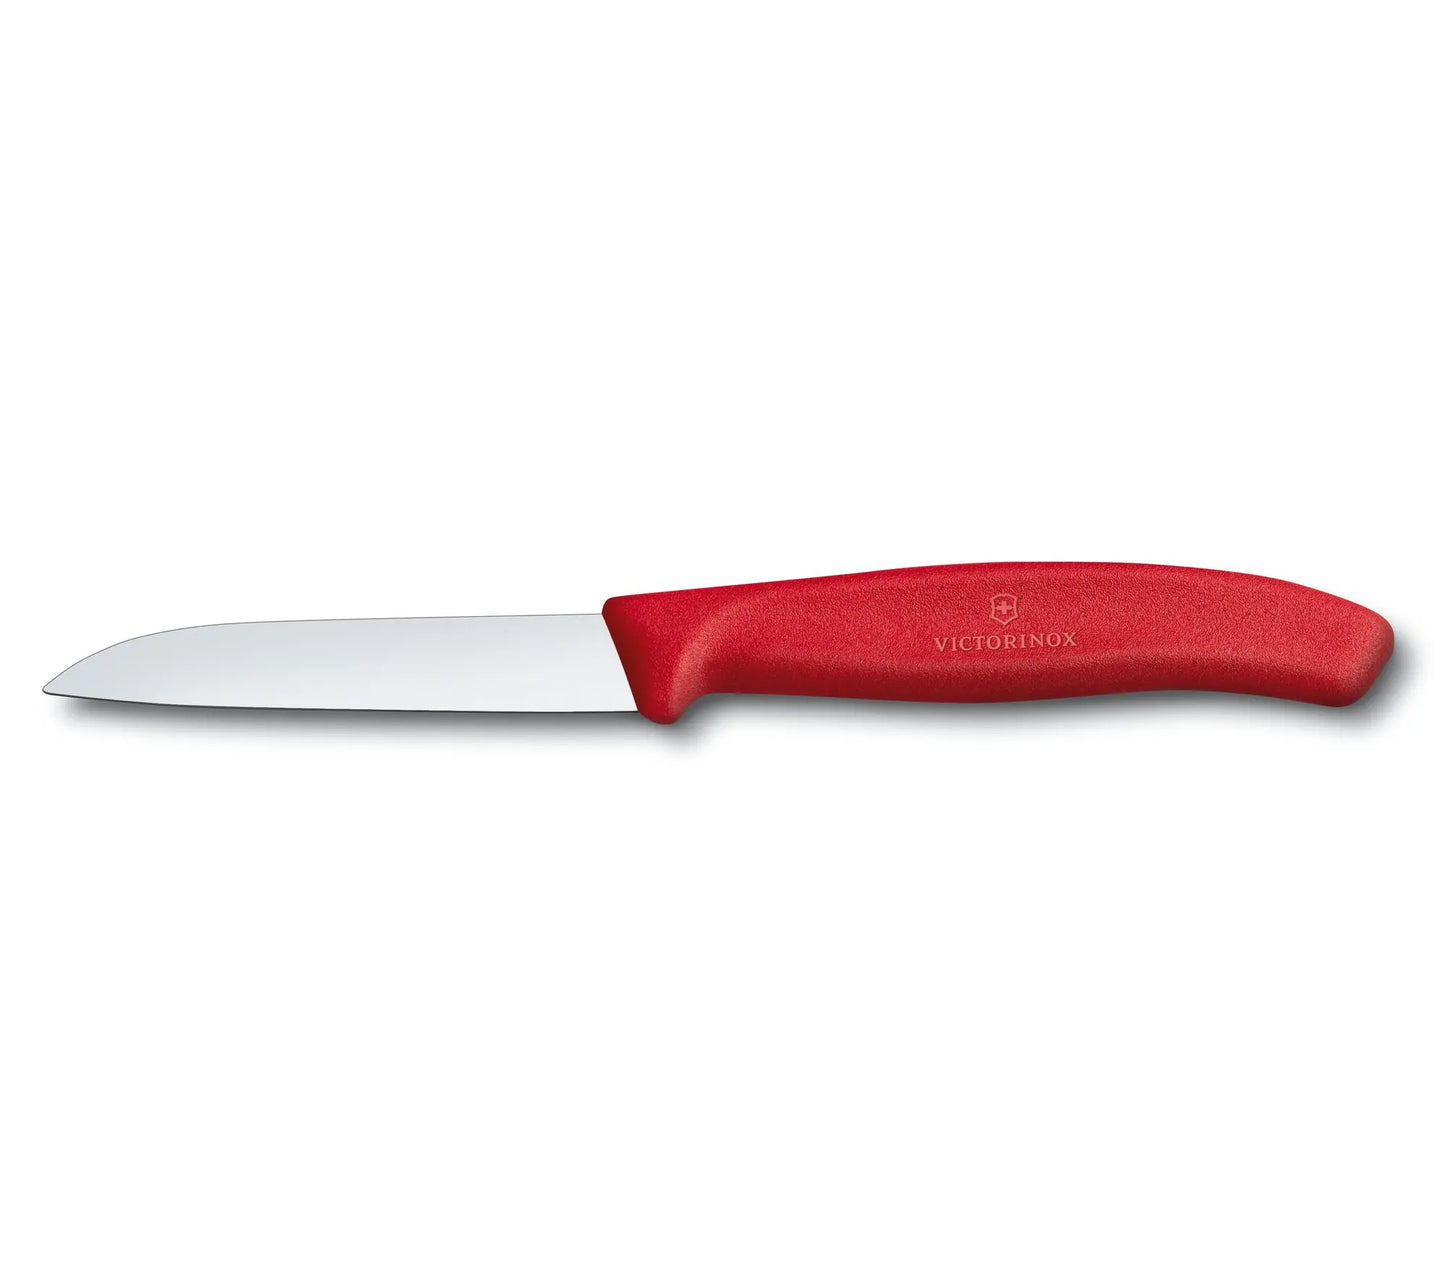 Victroinox Swiss Classic Paring Knife - Red